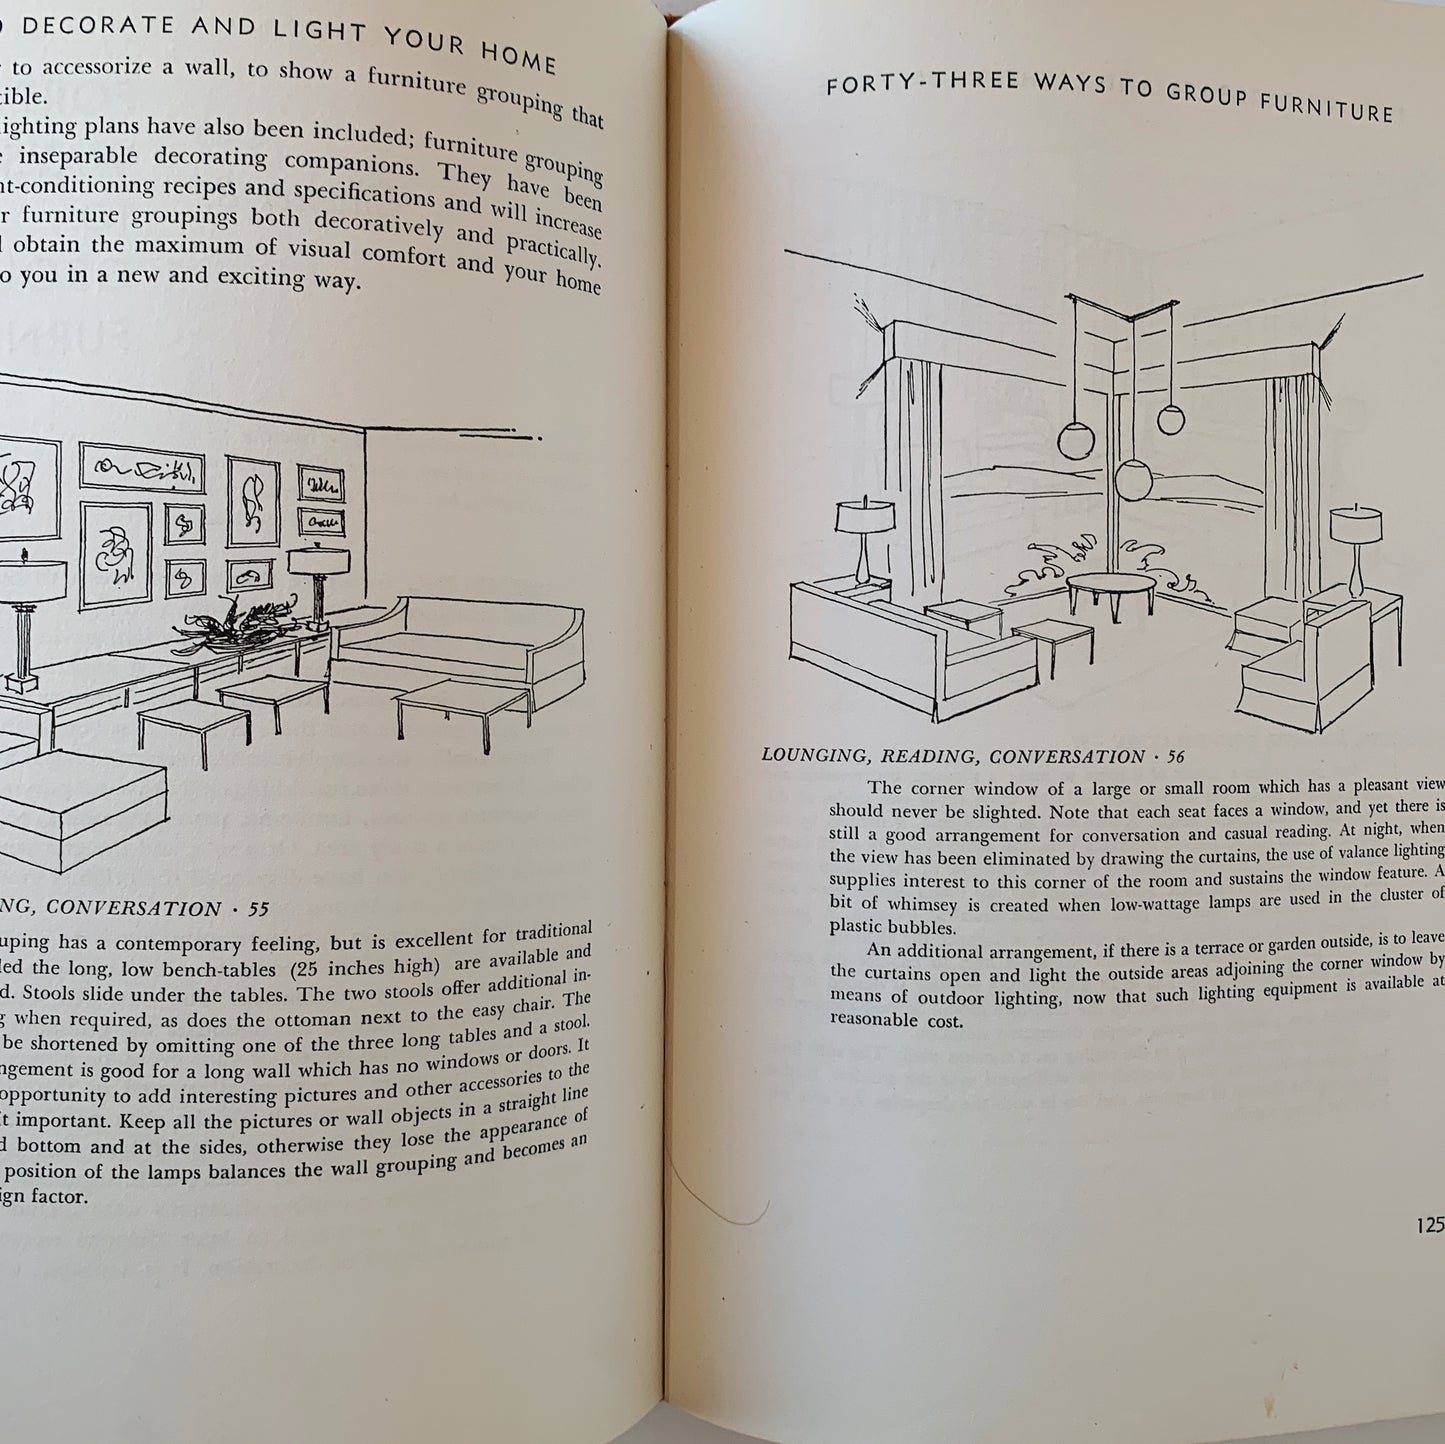 How to Decorate and Light Your Home, Mid-Century, 1955